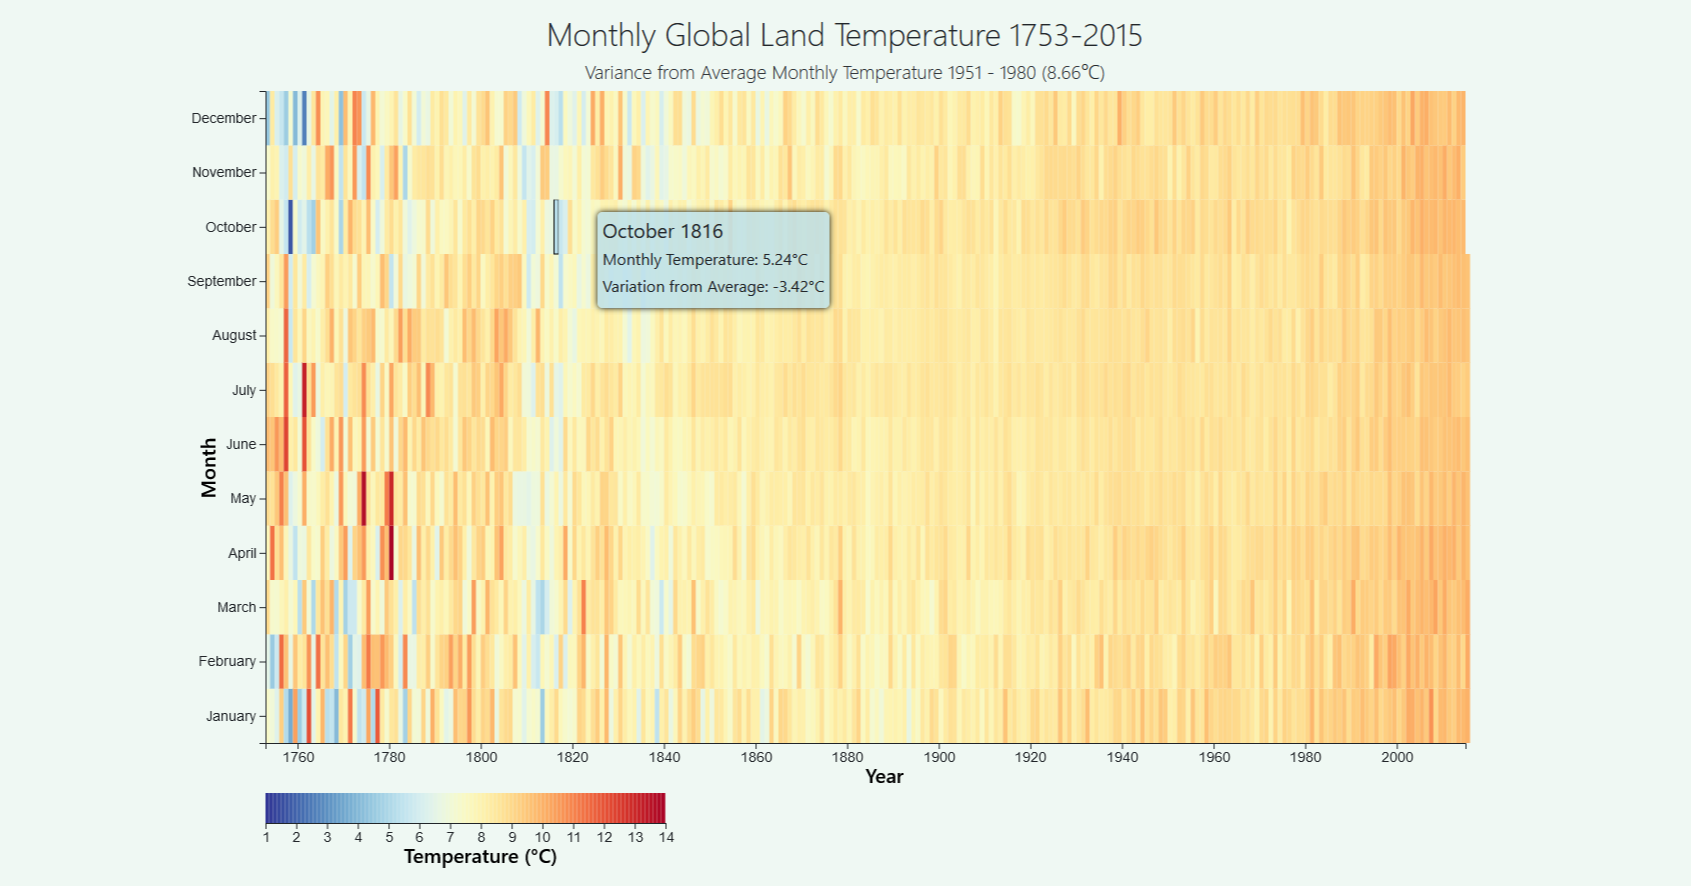 Data Visualisation Project 3 - Monthly Temperature Heat Map (1753-2015)